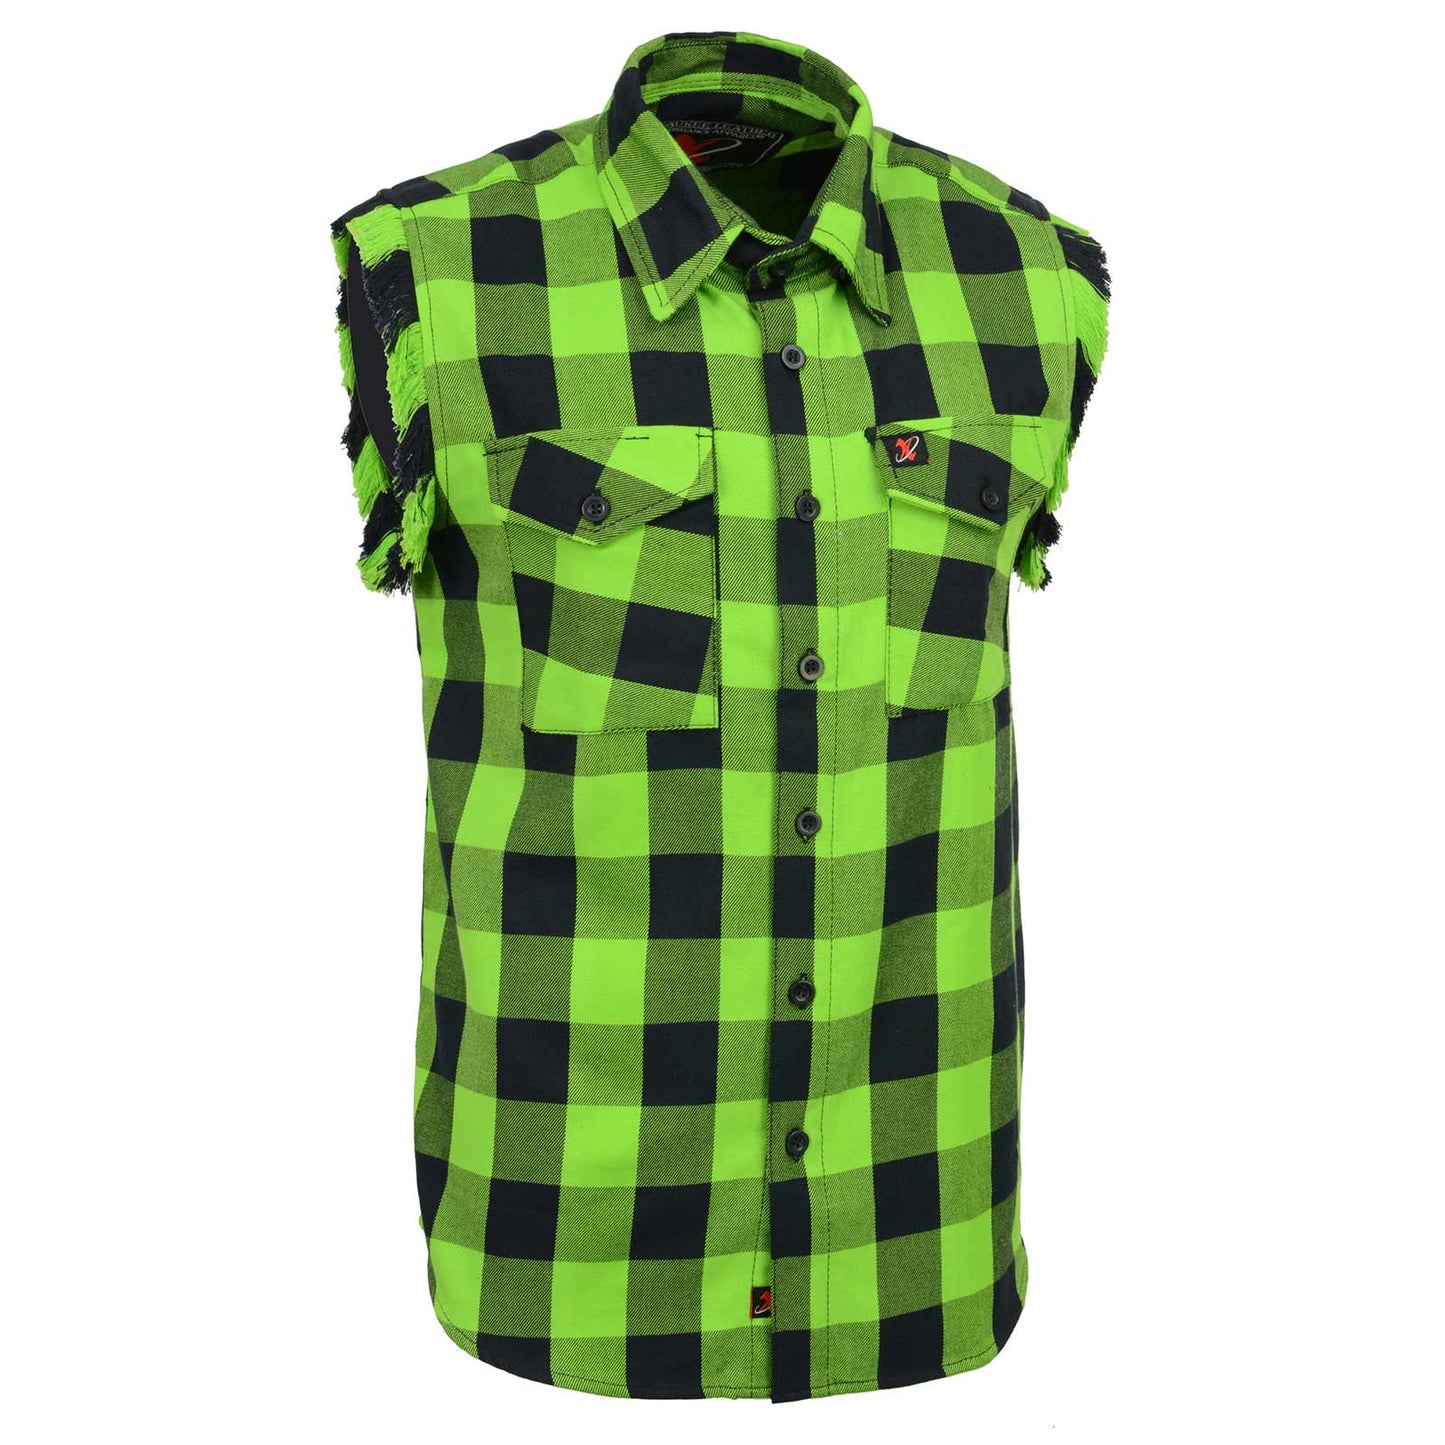 Milwaukee Leather MNG11691 Men's 'Checkered' Black and Green Cut Off Flannel Shirt